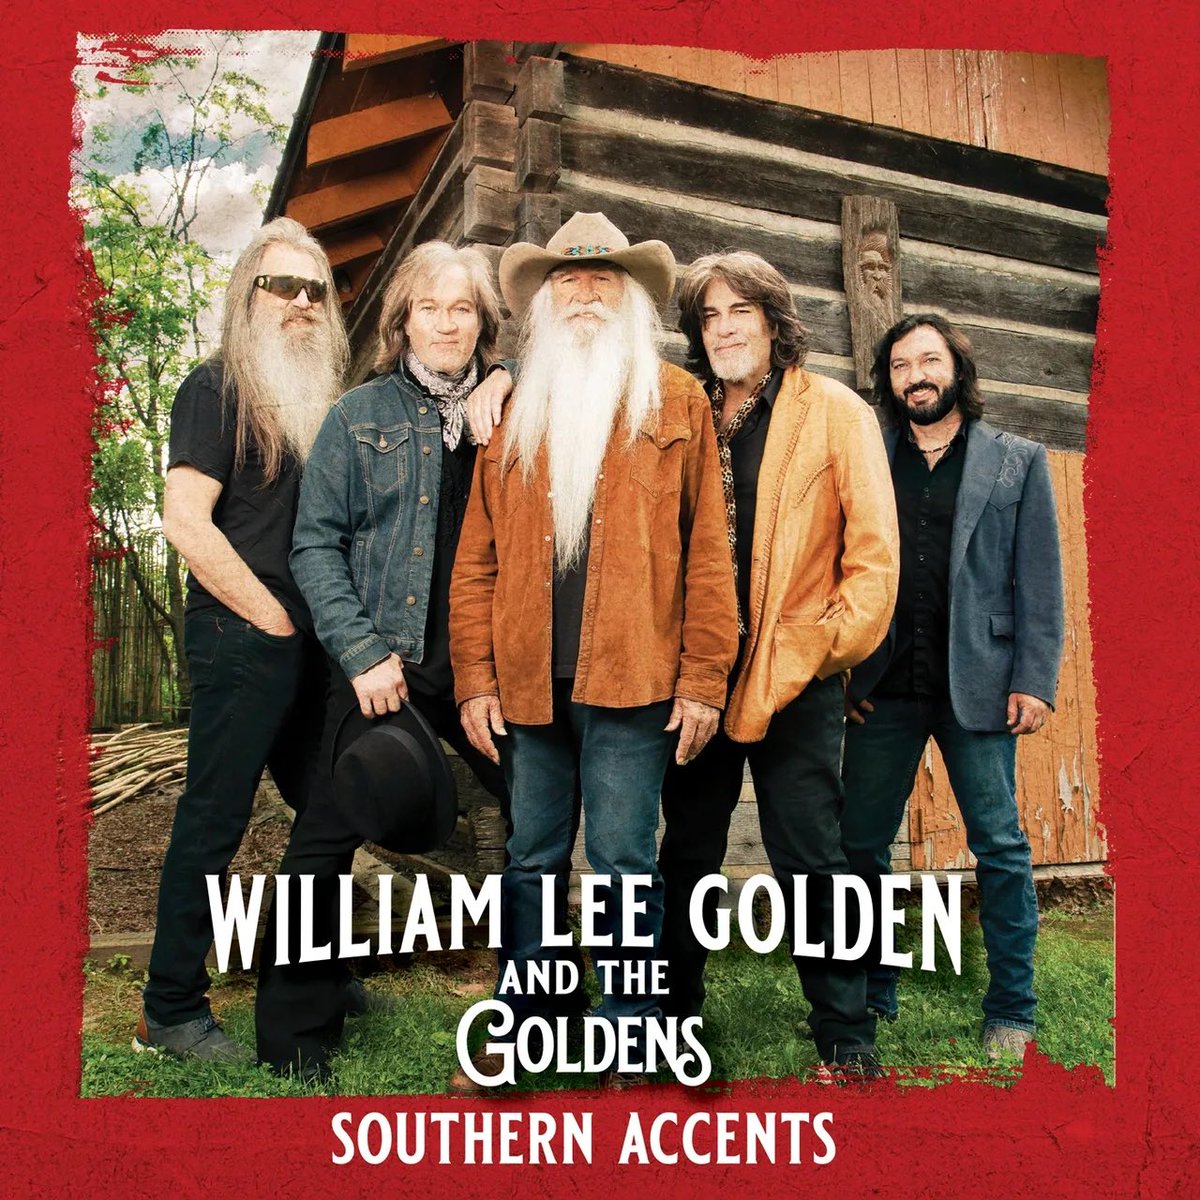 We're excited to share the premiere of our official music video for 'Southern Accents' via @paltrowitz Click here to watch: paltrocast.com/f/premiere-sou… Producer: @wlgolden & Adam Wagner Director: @JeffPanzer2